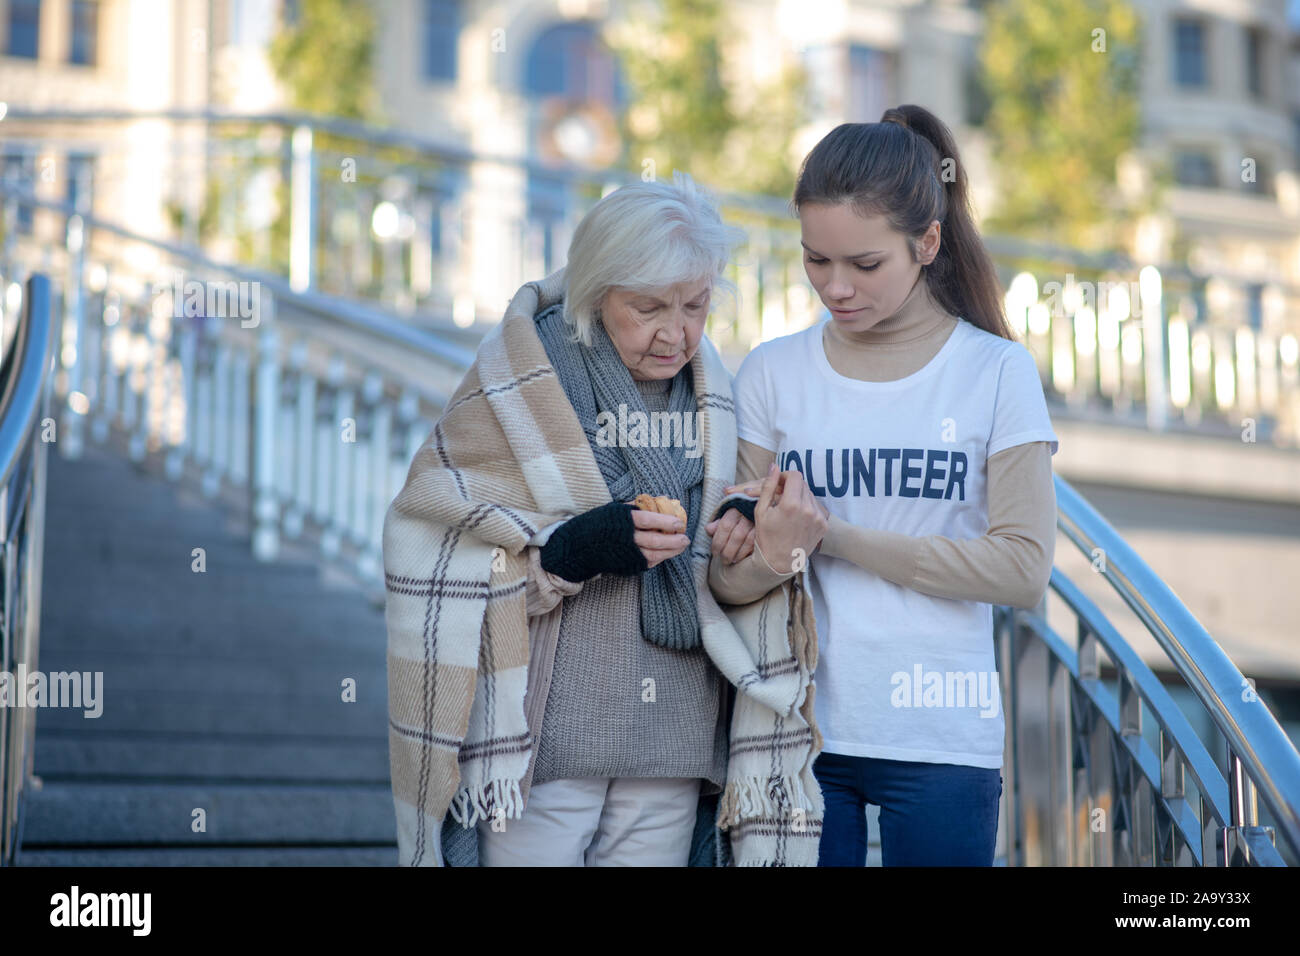 Young kind volunteer helping homeless woman to walk Stock Photo